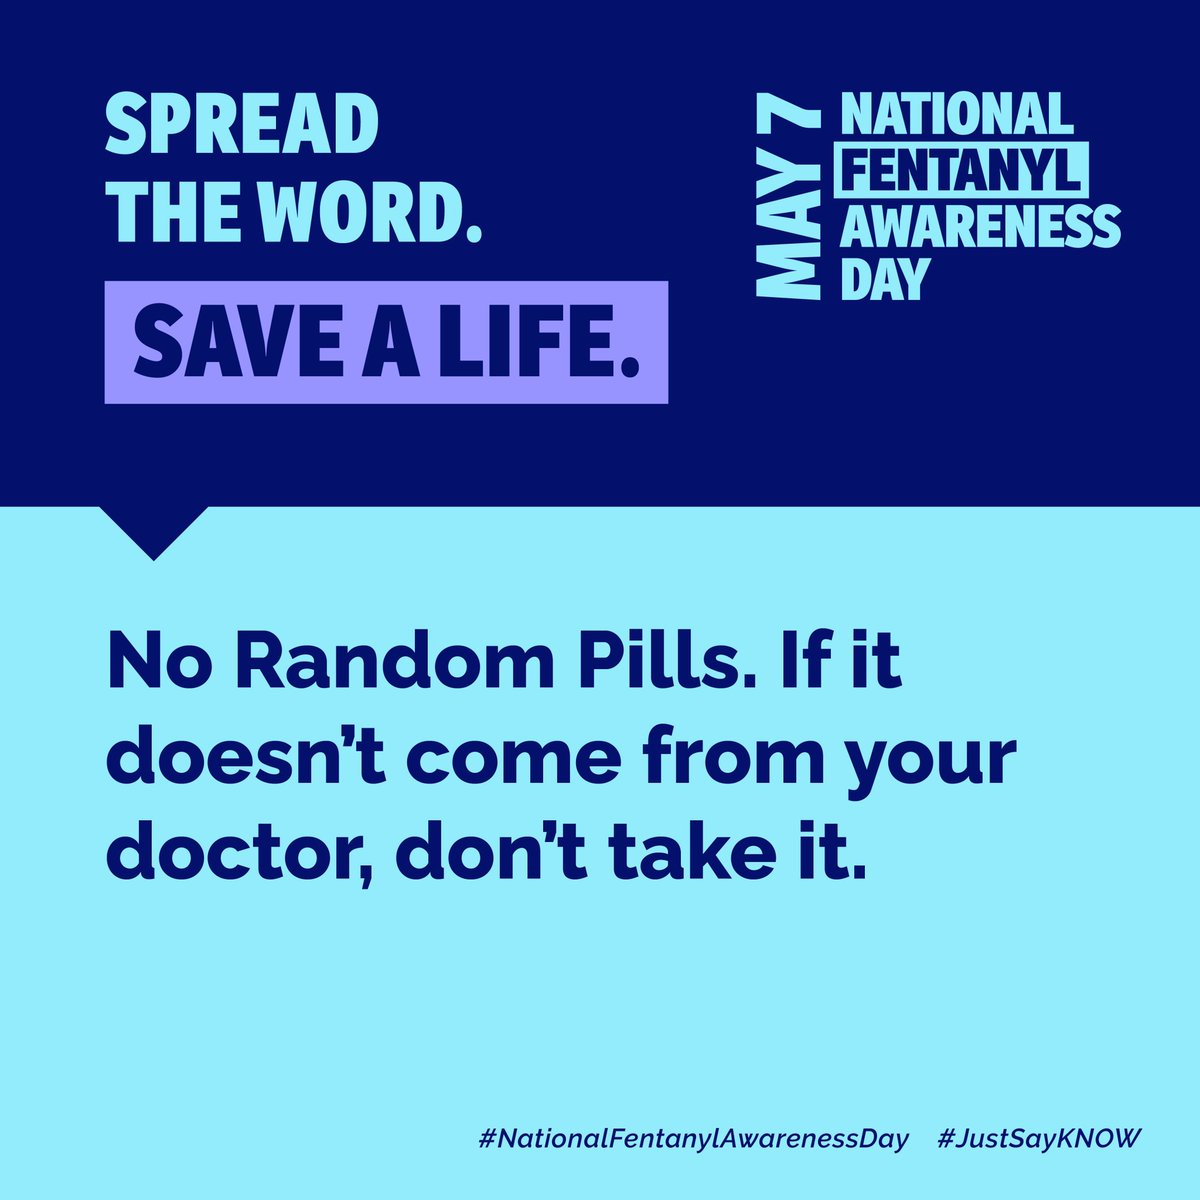 Drug poisonings are now the leading cause of death for Americans between the ages of 18-45. Educate yourself & spread the word about the dangers of #Fentanyl, #fakepills and how #OnePillcanKill. You can save a life. dea.gov/resources/fact…; fentanylawarenessday.org. #justKNOW